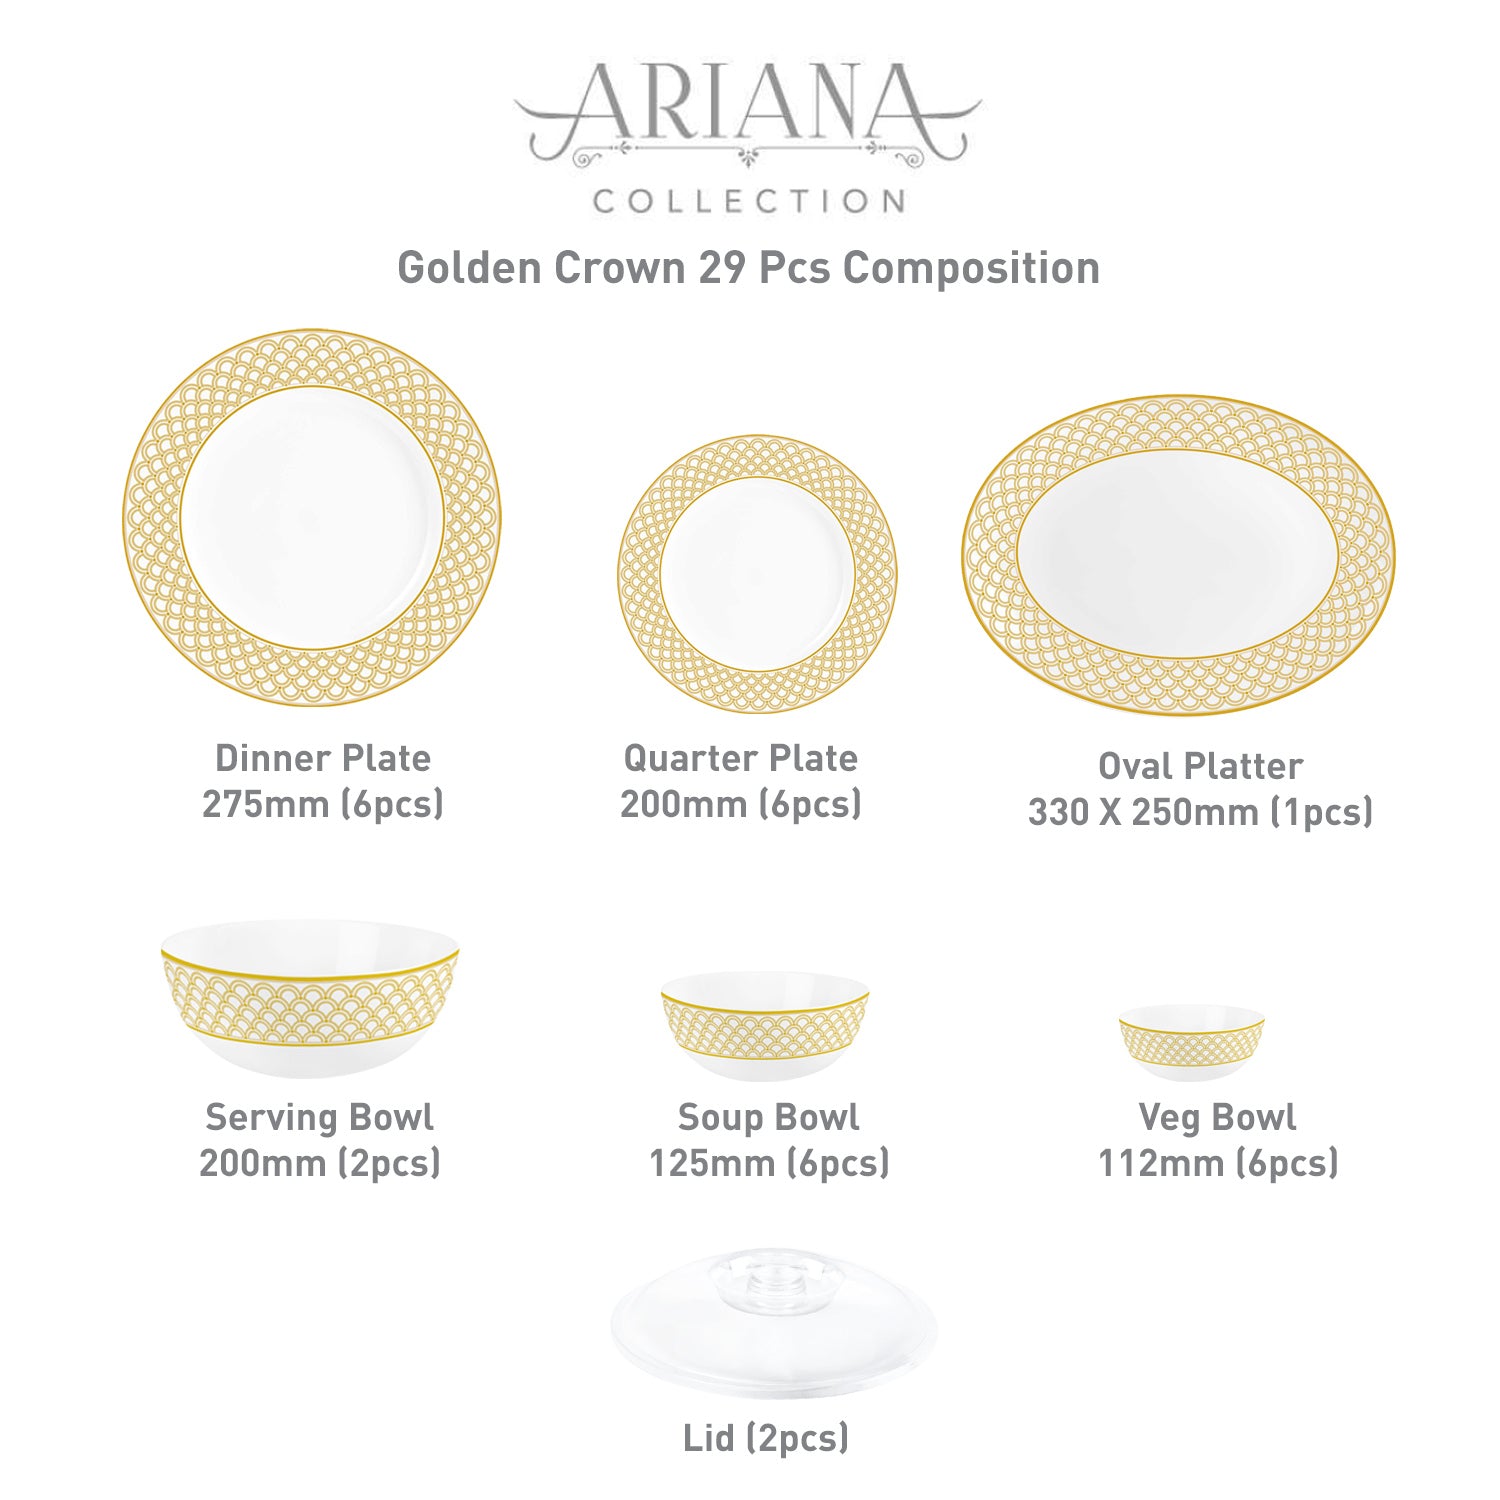 Ariana Series 27 Pieces Opalware Dinner Set for Family of 6 Golden Crown